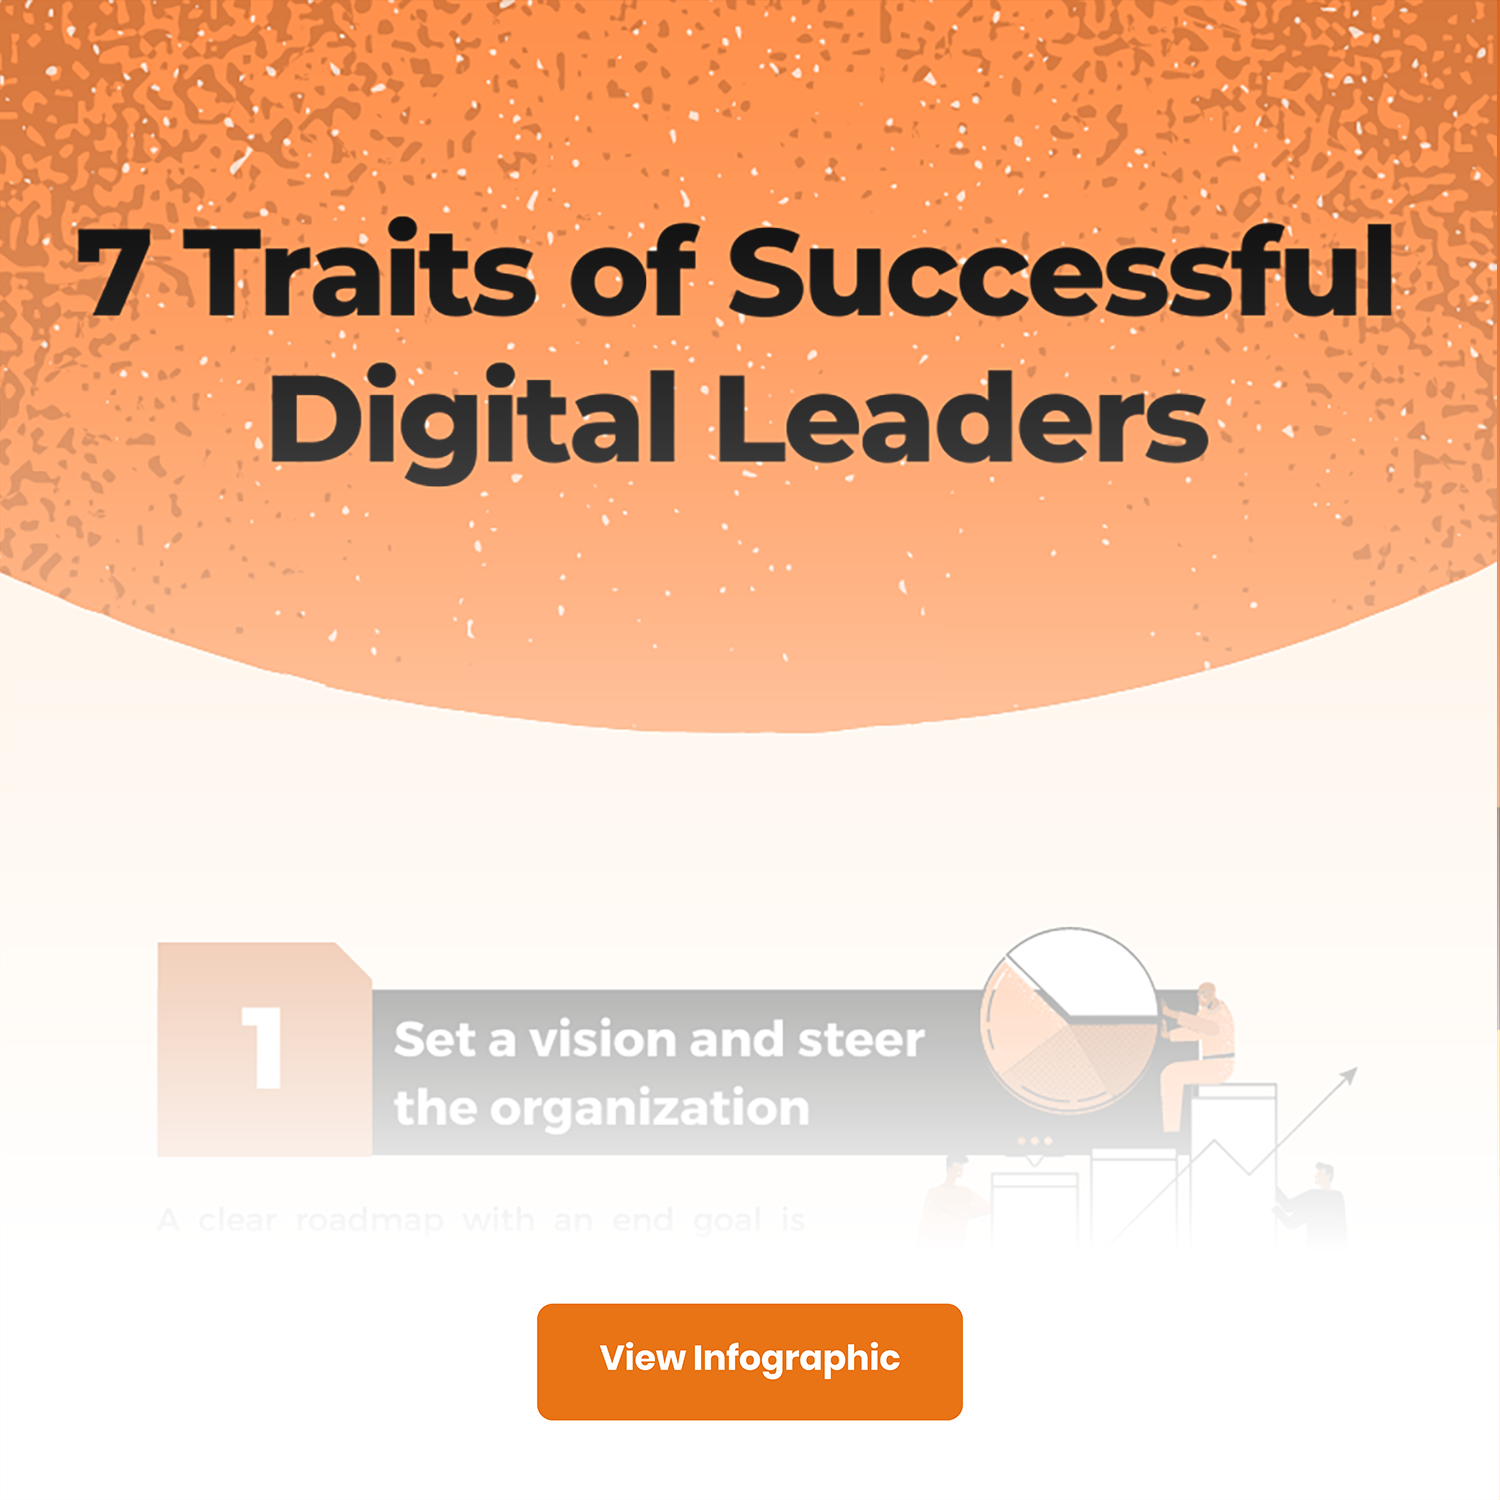 7 Traits of Successful Digital Leaders-Infographic